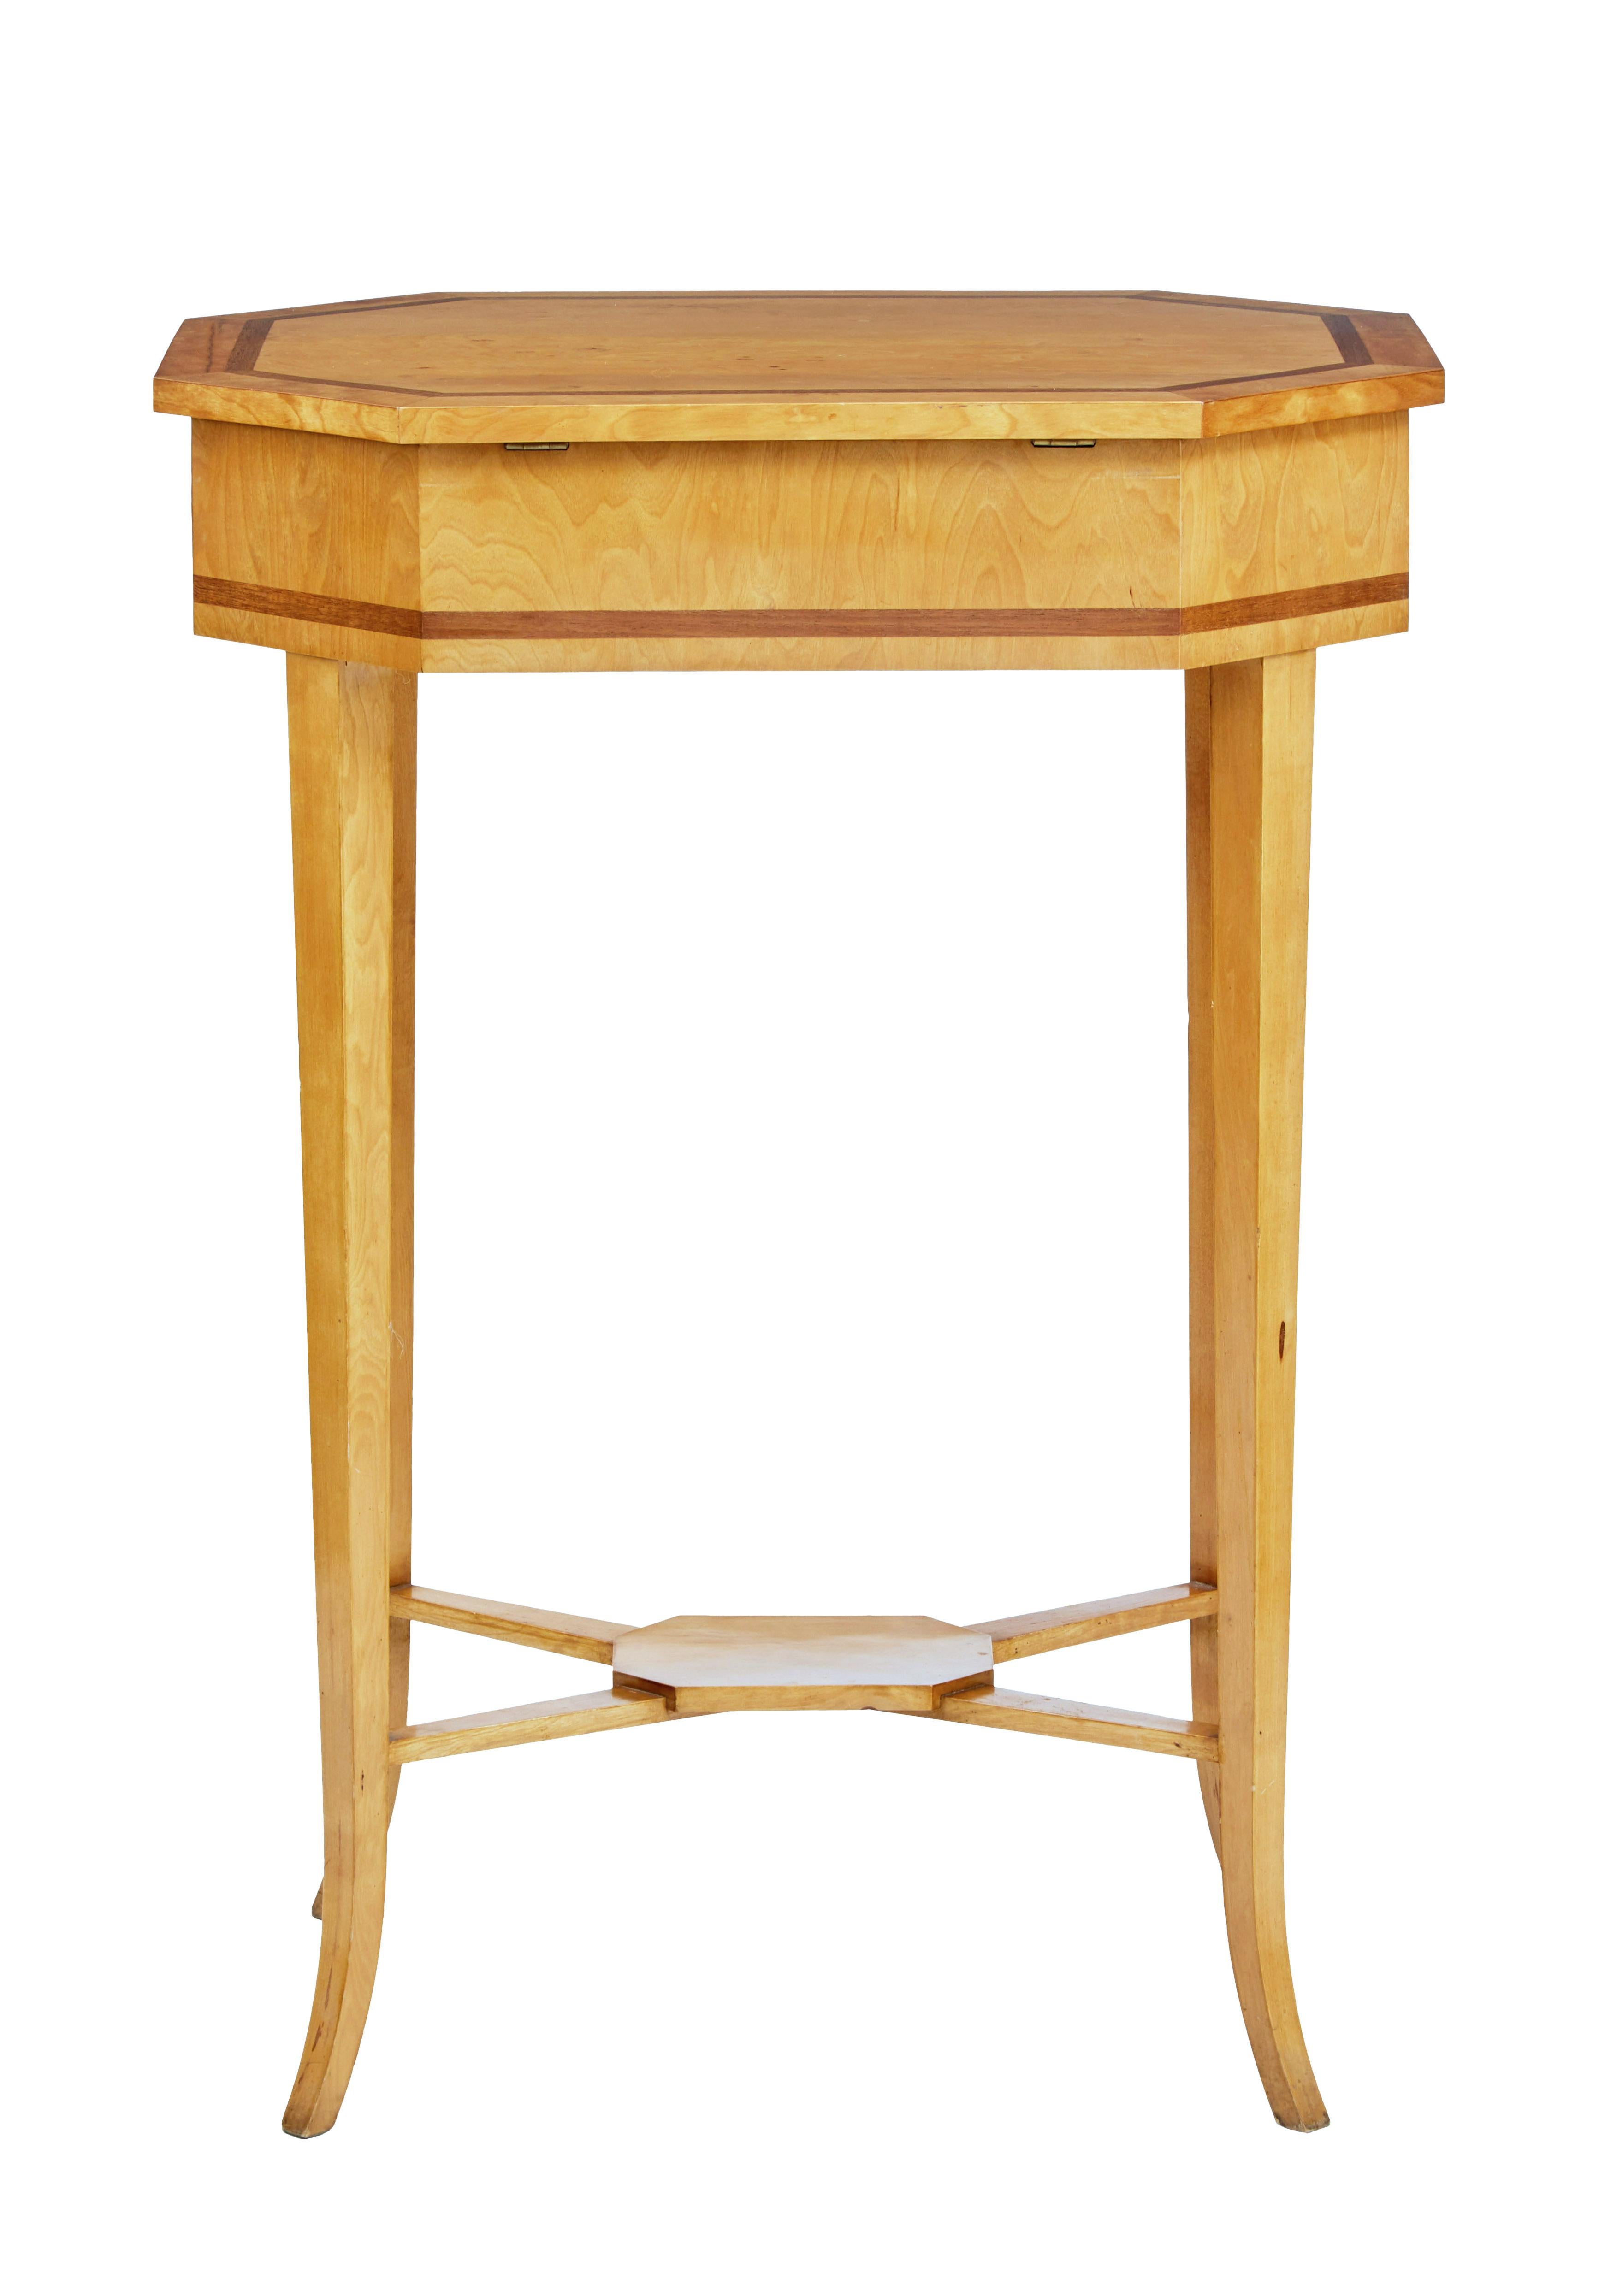 Good quality birch work table, circa 1900.

Octagonal shaped top with oak crossbanding. Top opens to reveal a fully fitted interior of compartments.

Central section lifts out for further secret storage. Front compartment turns over for a pin